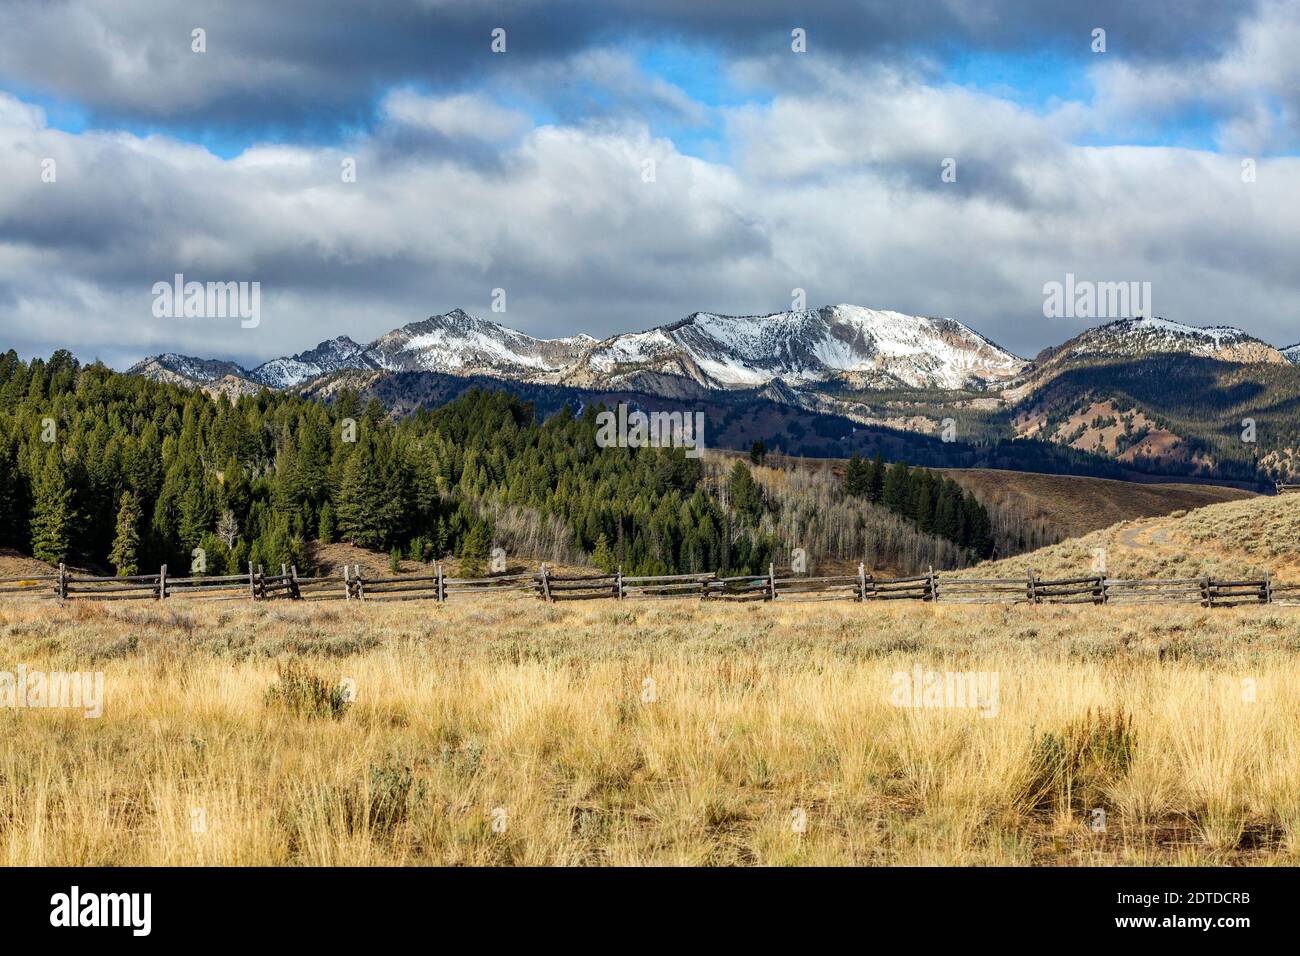 USA, Idaho, Stanley, Ranch landscape with mountains and forests Stock Photo